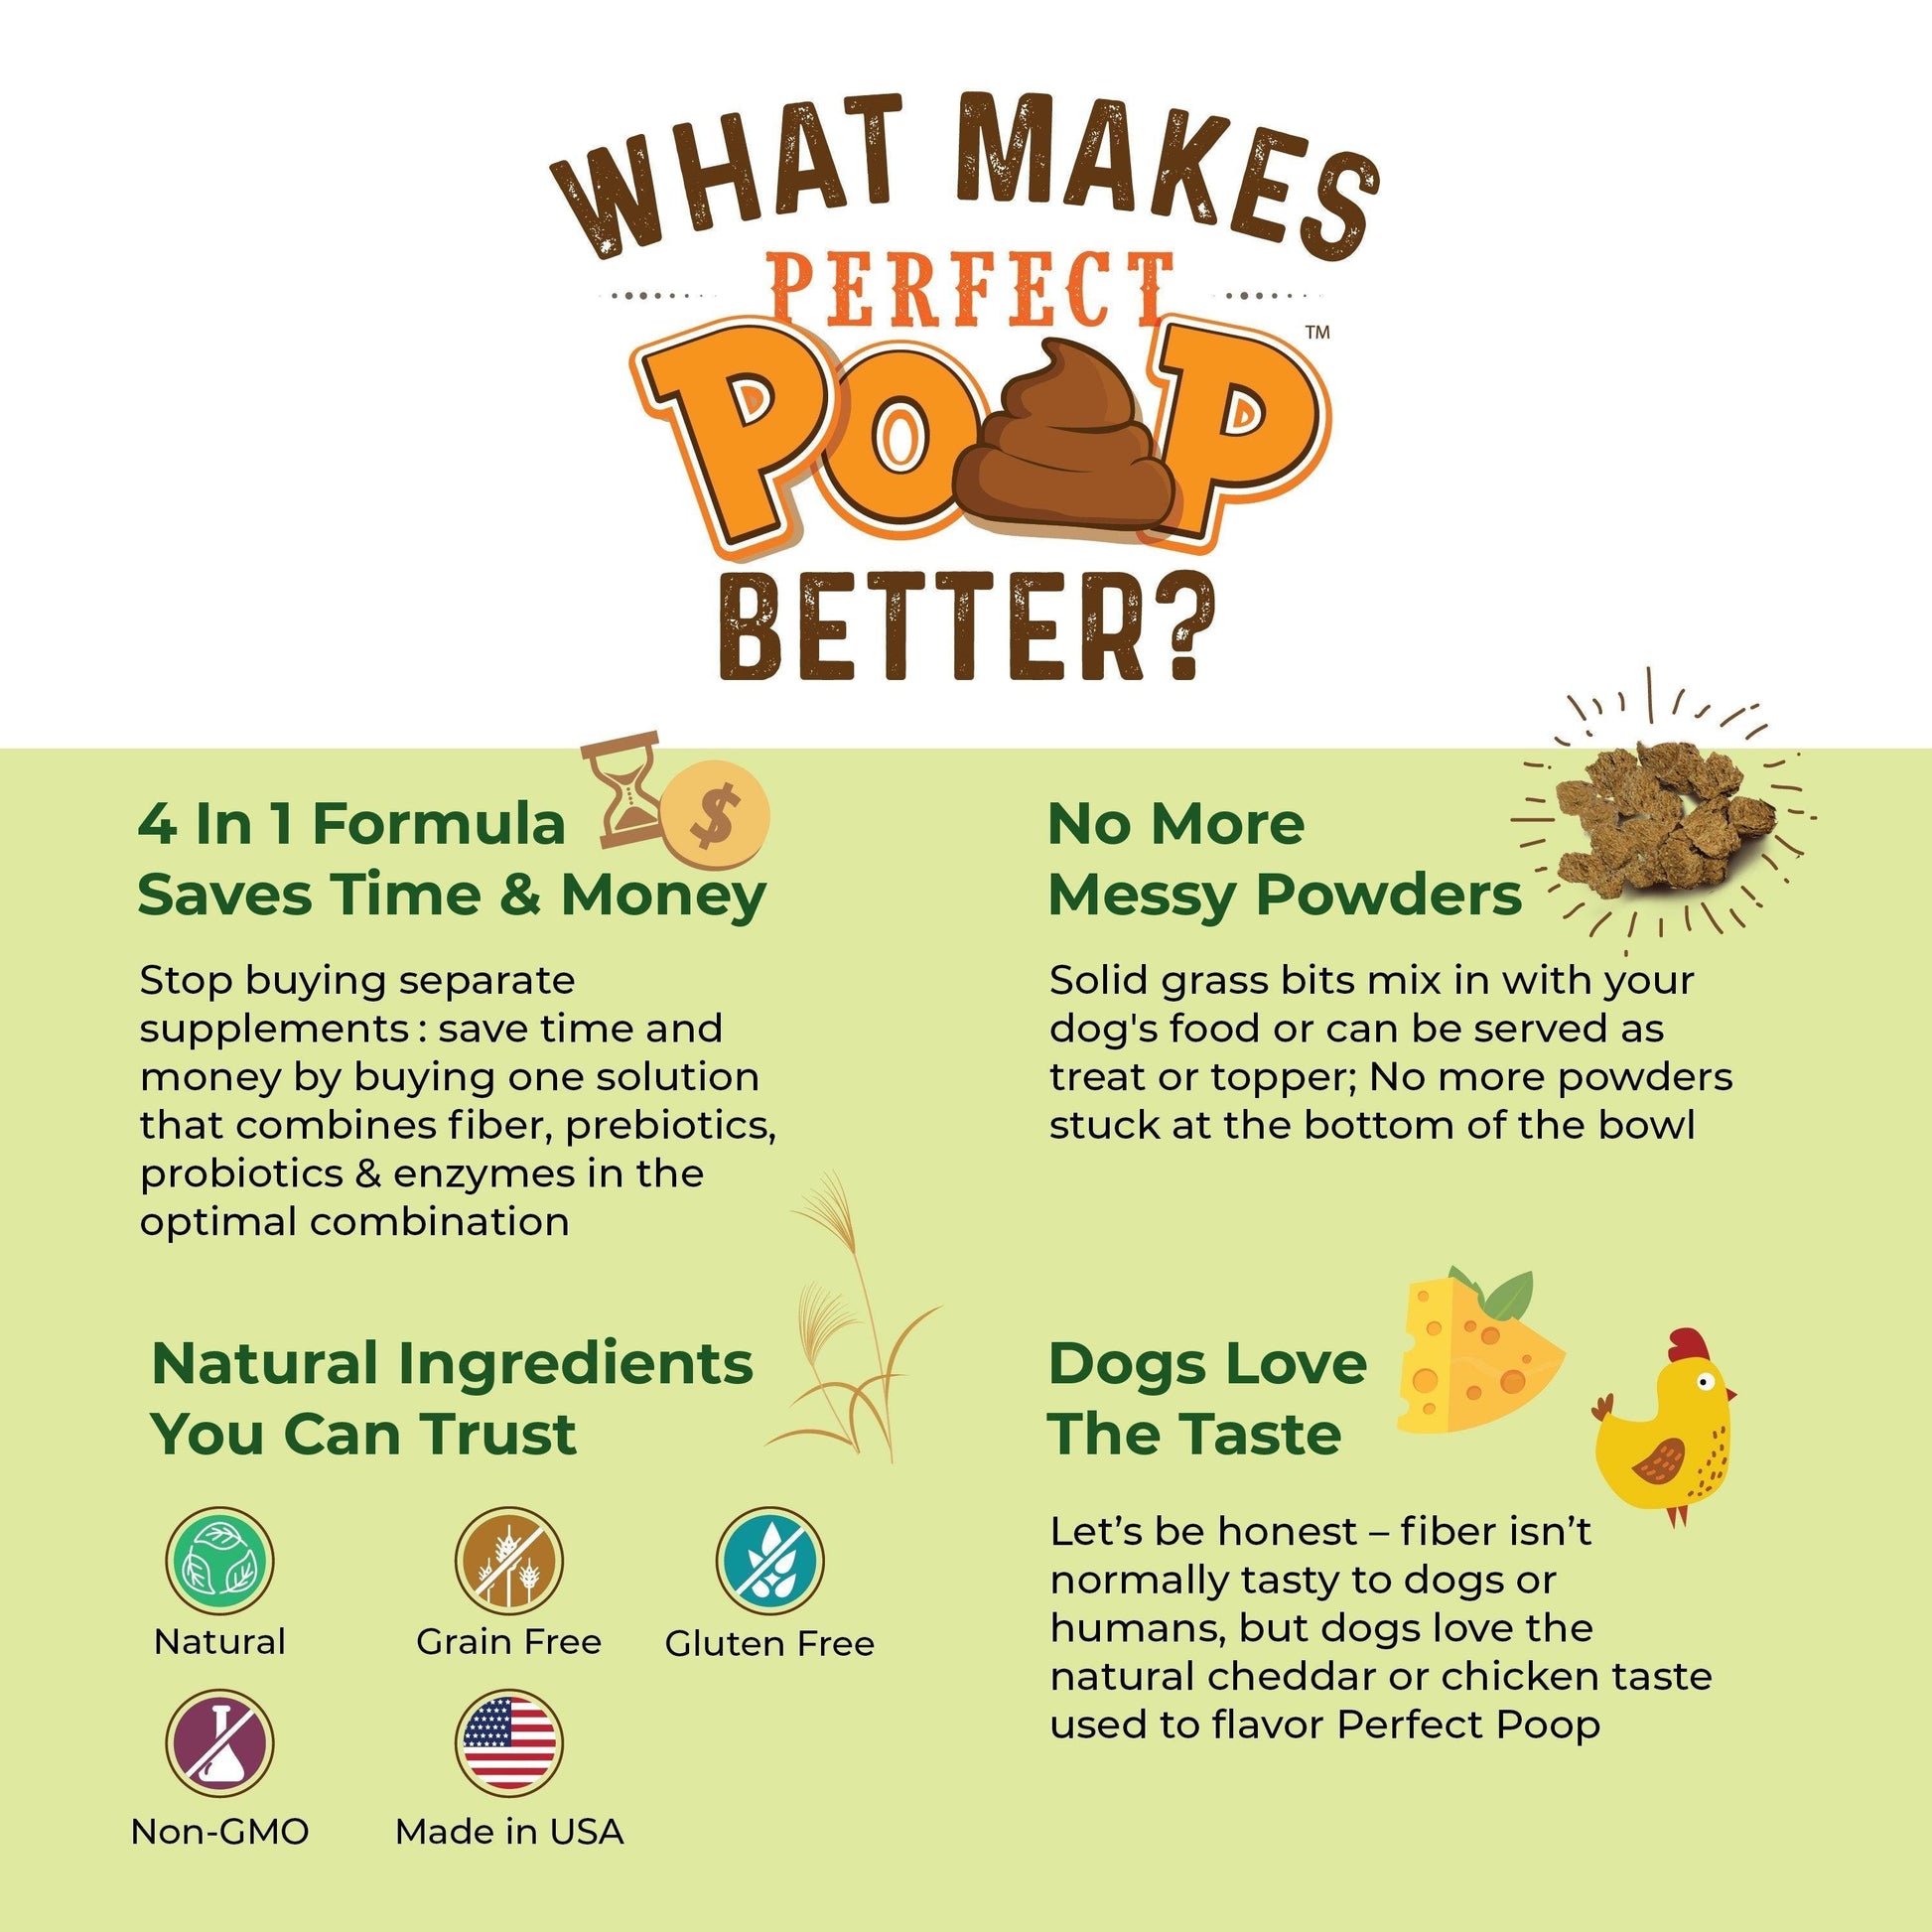 What makes perfect poop better?